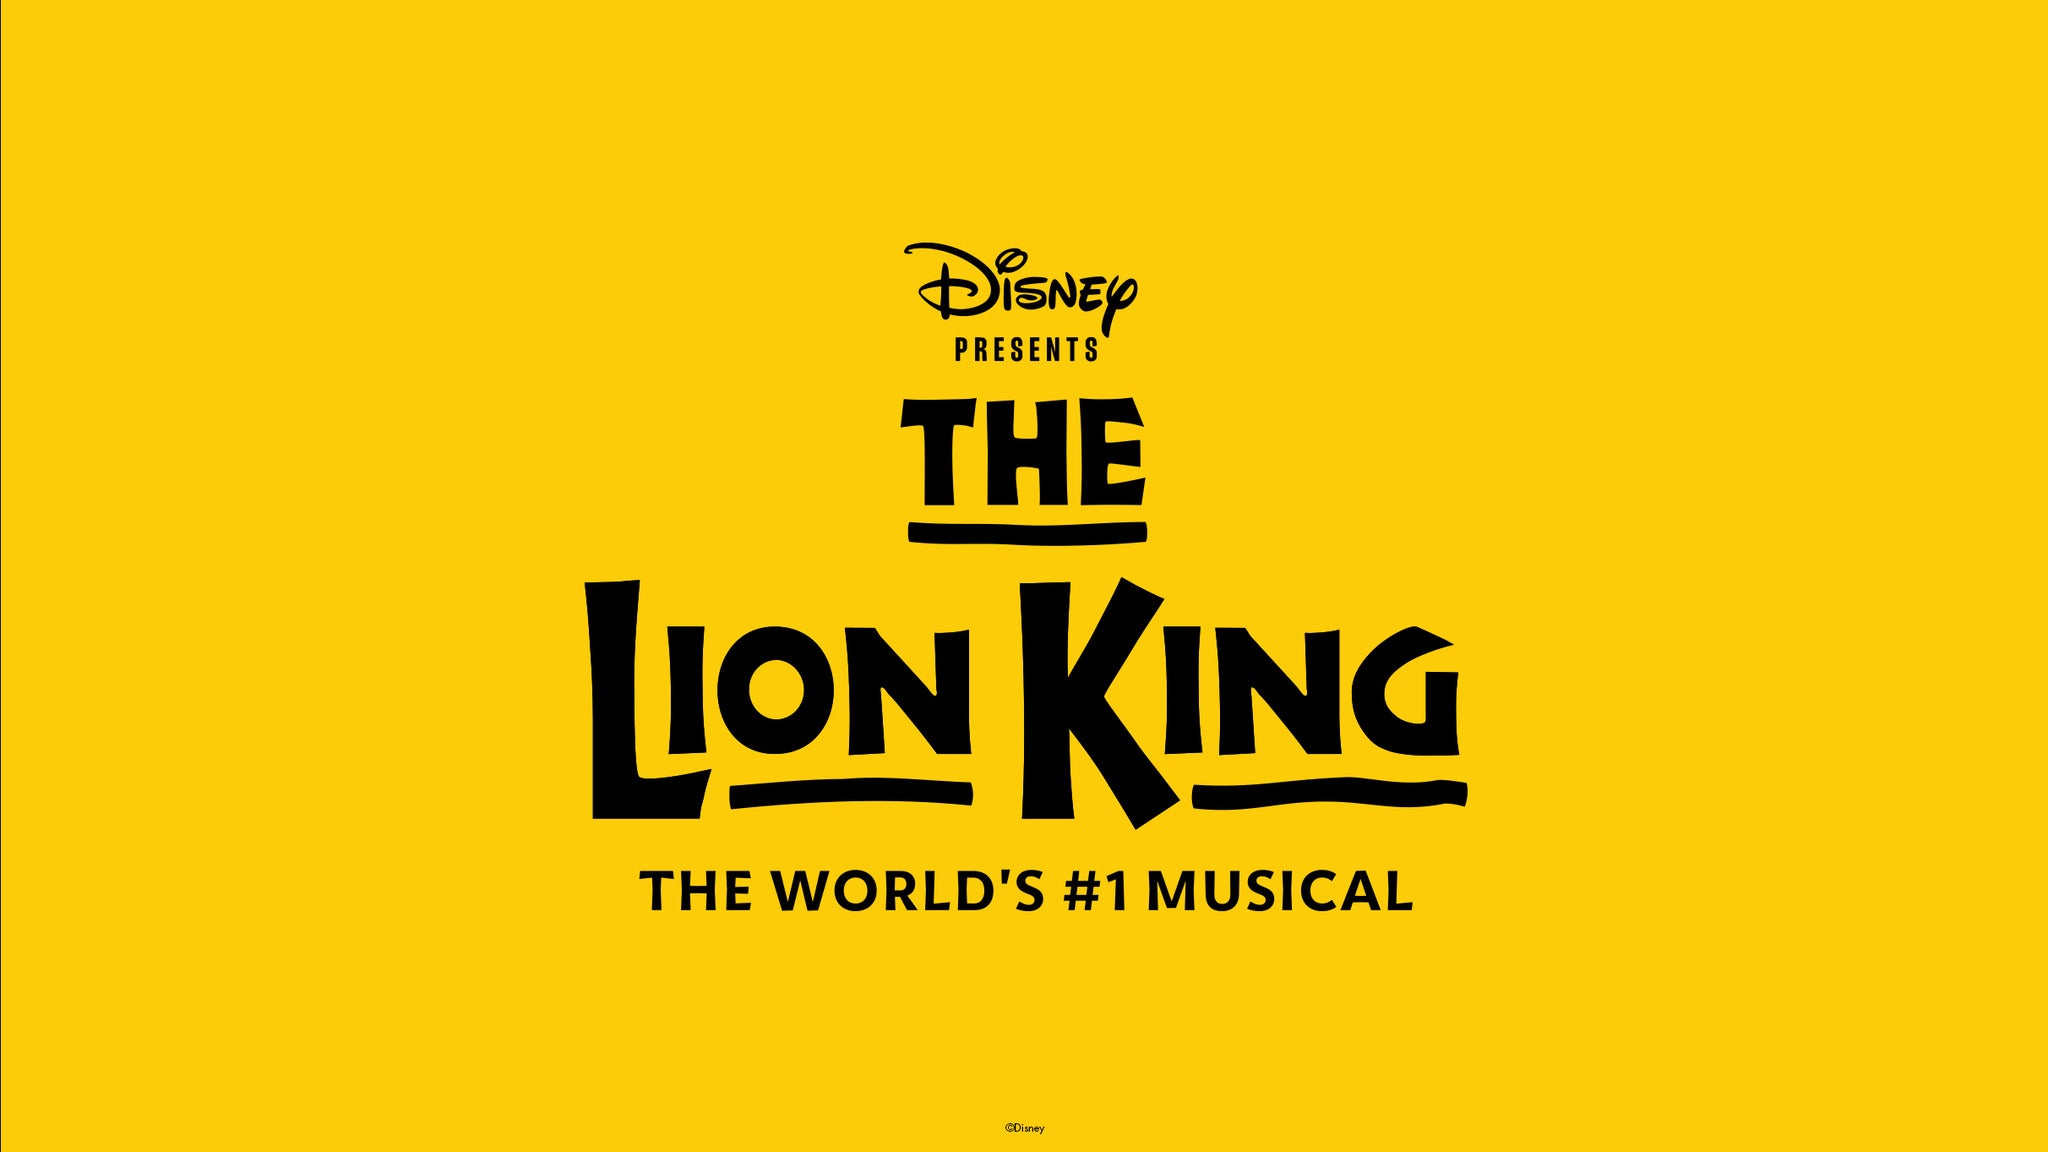 Disney Presents The Lion King (Touring) in Detroit event information